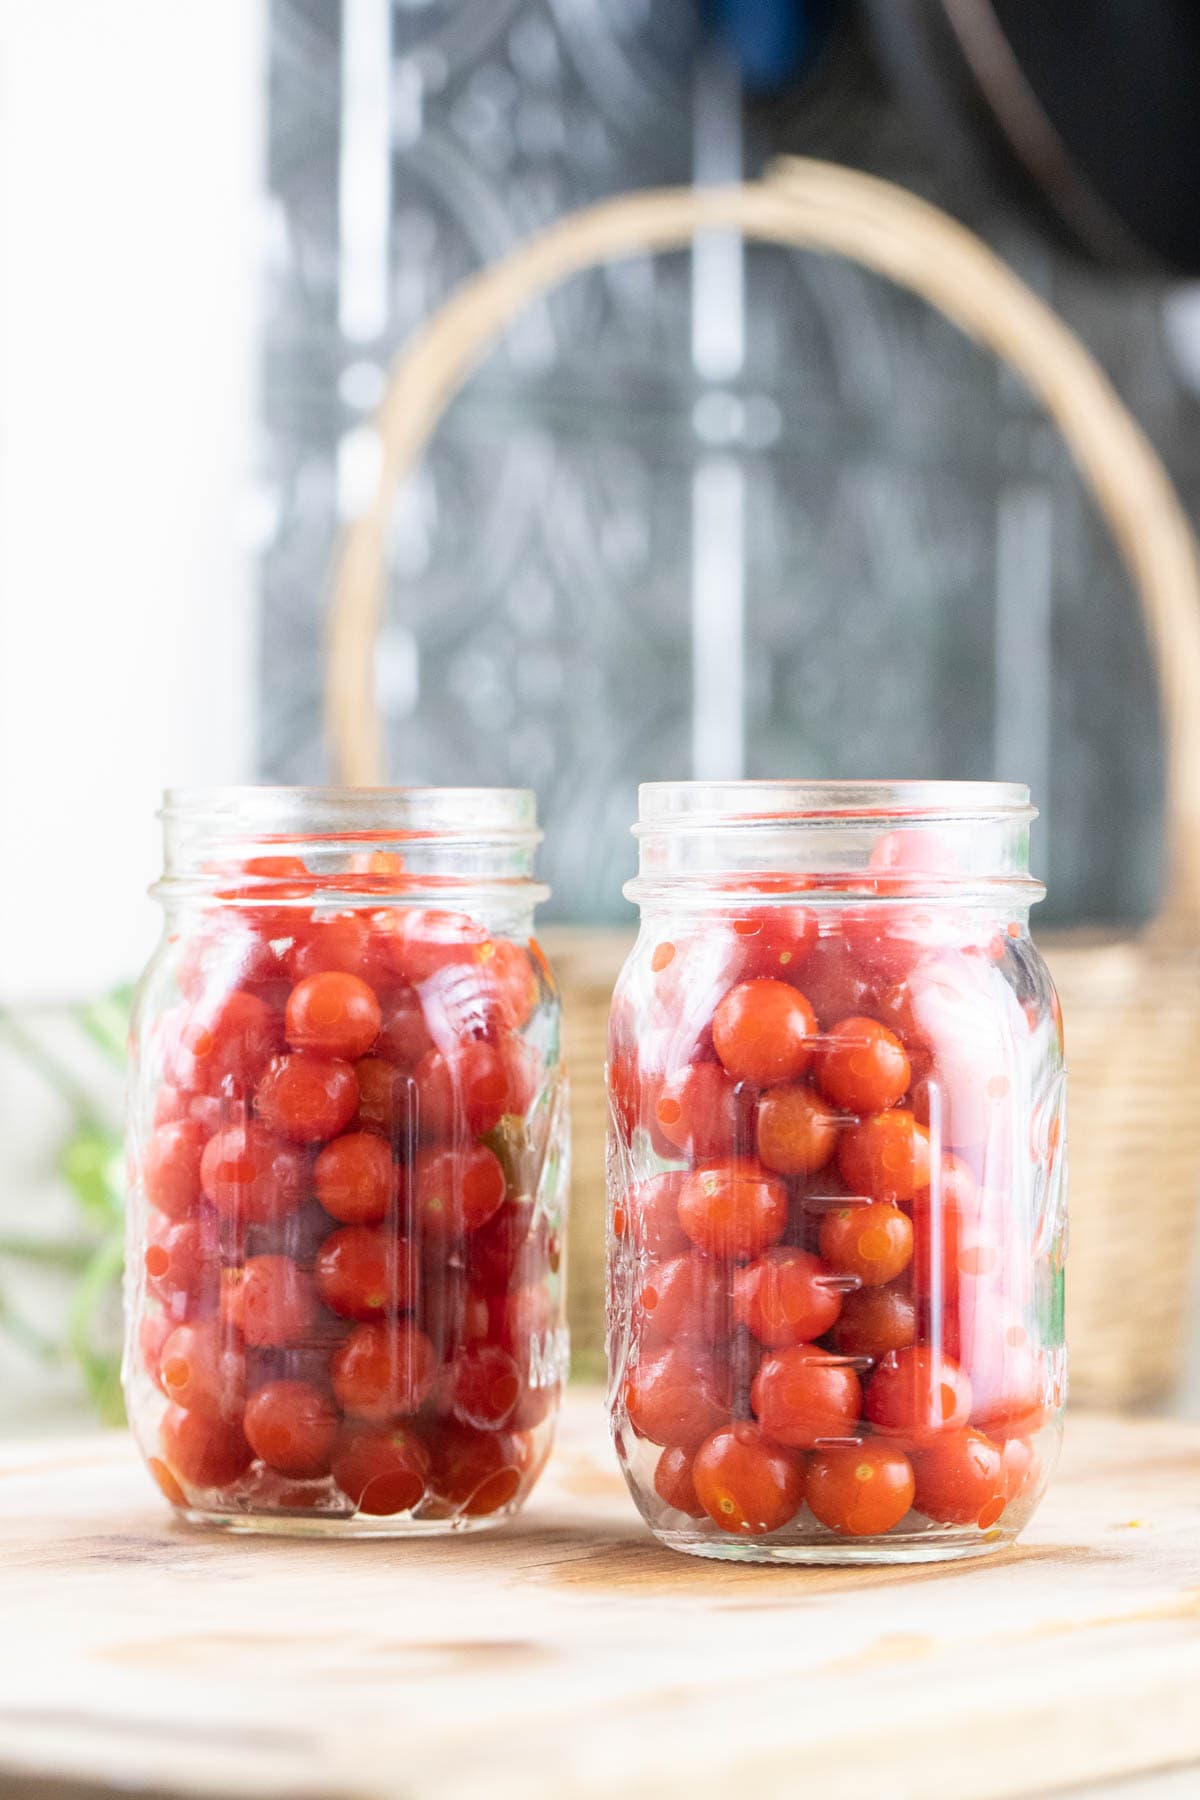 Packing cherry tomatoes in jars for canning.